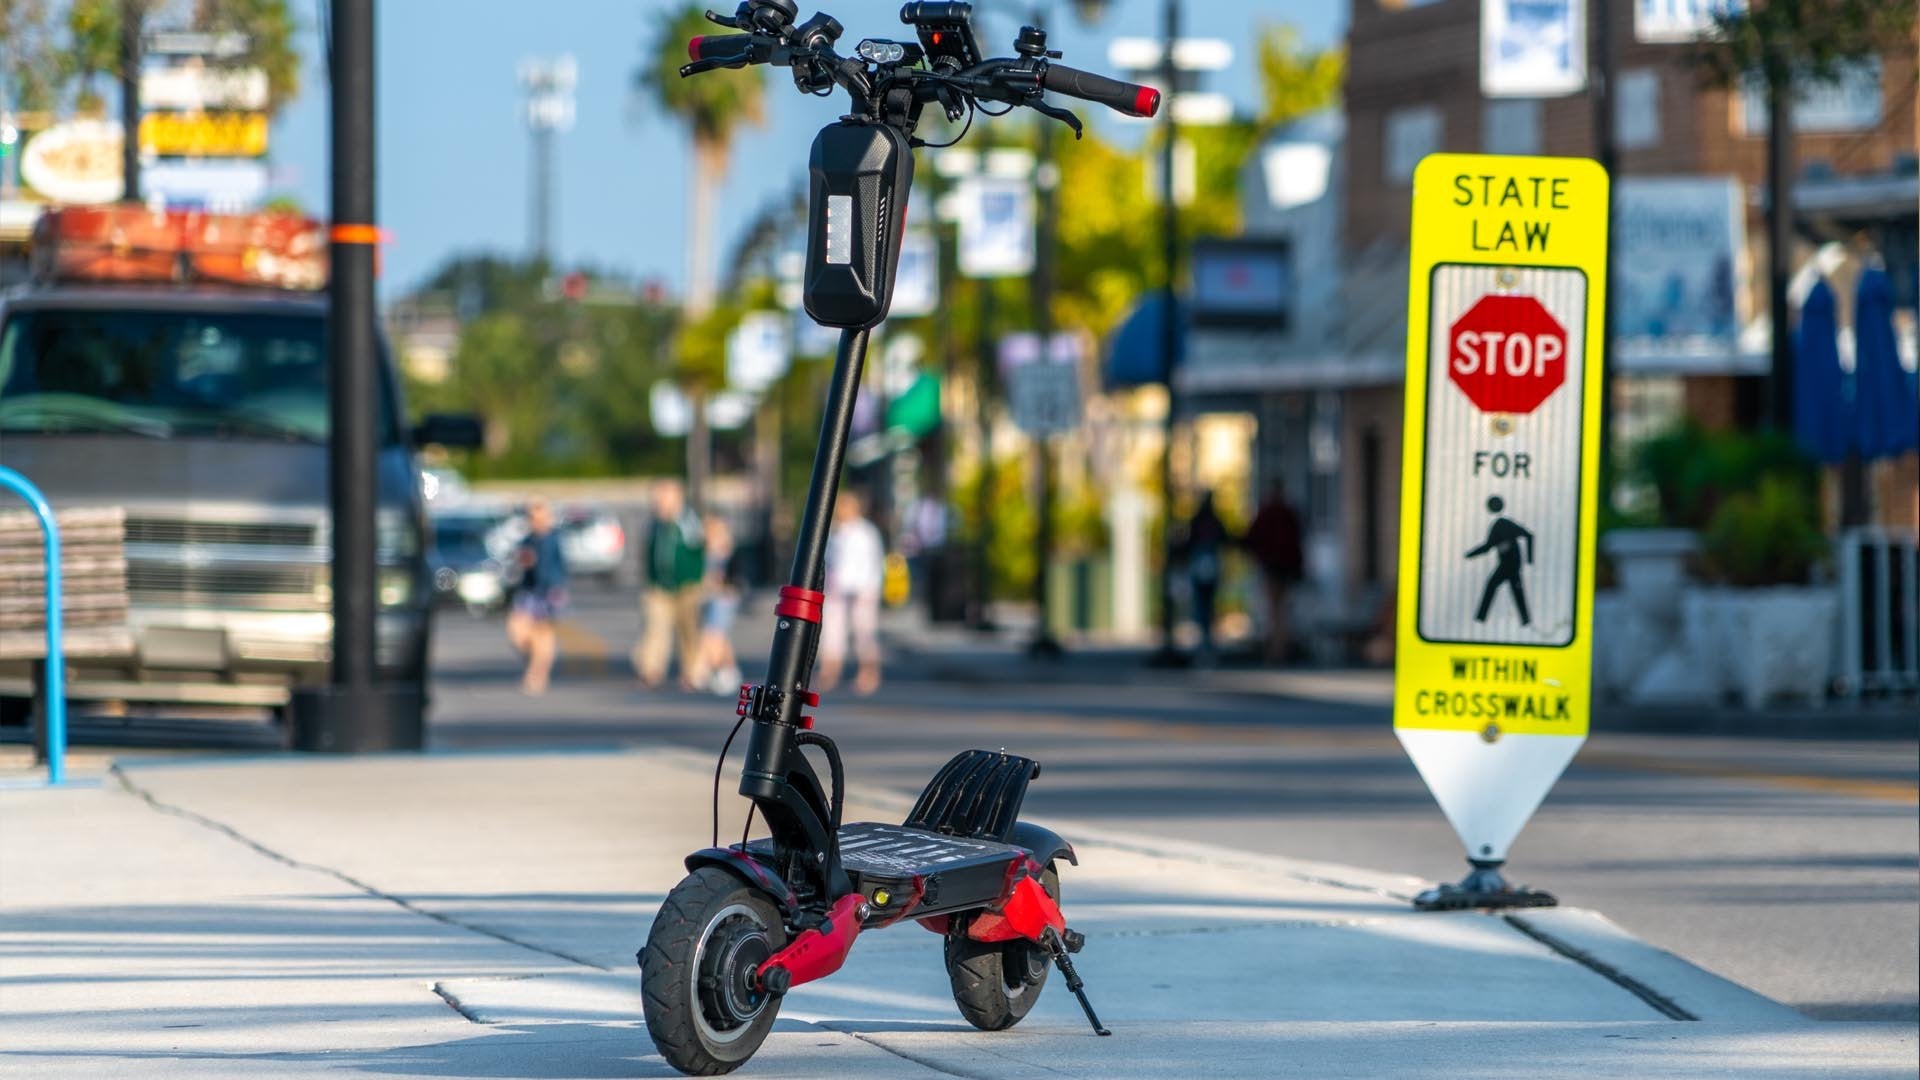 Electric Scooter Safety Tips- Ride Safely and Legally